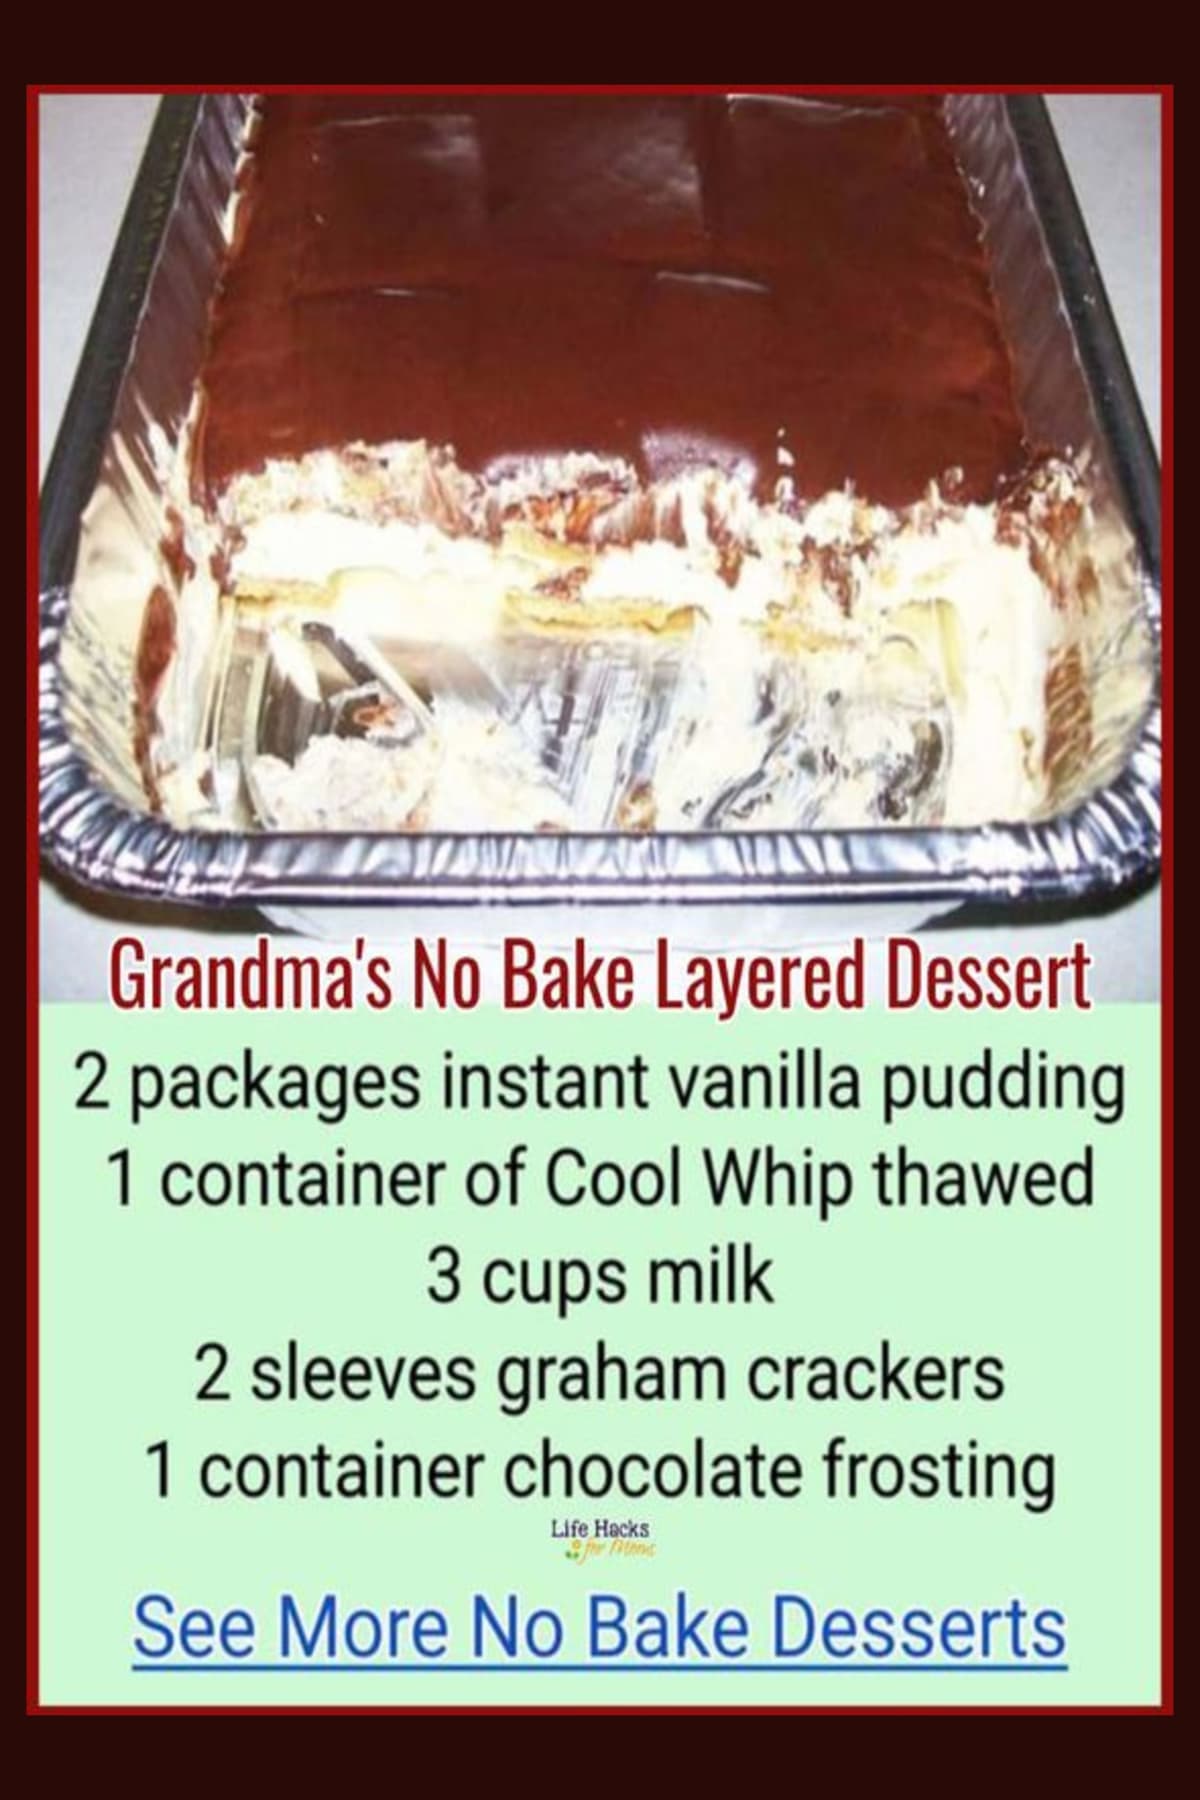 Large batch no bake Cool Whip desserts from my Grandmother's church ladies potluck cookbook